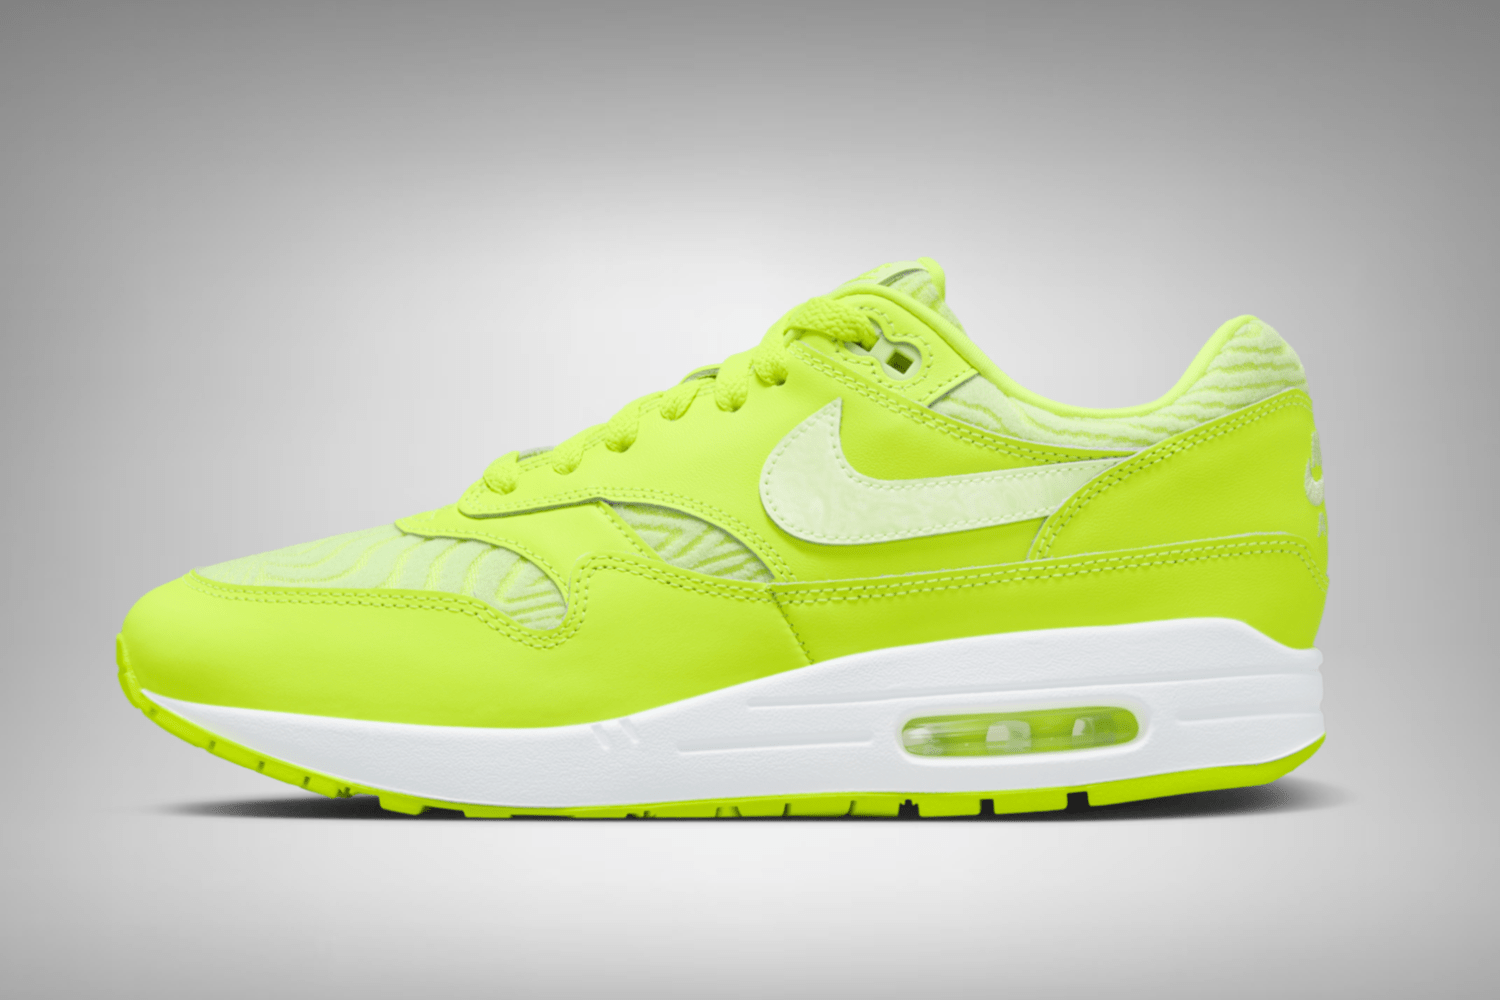 Nike unveils Air Max 1 Topographic Terry Cloth